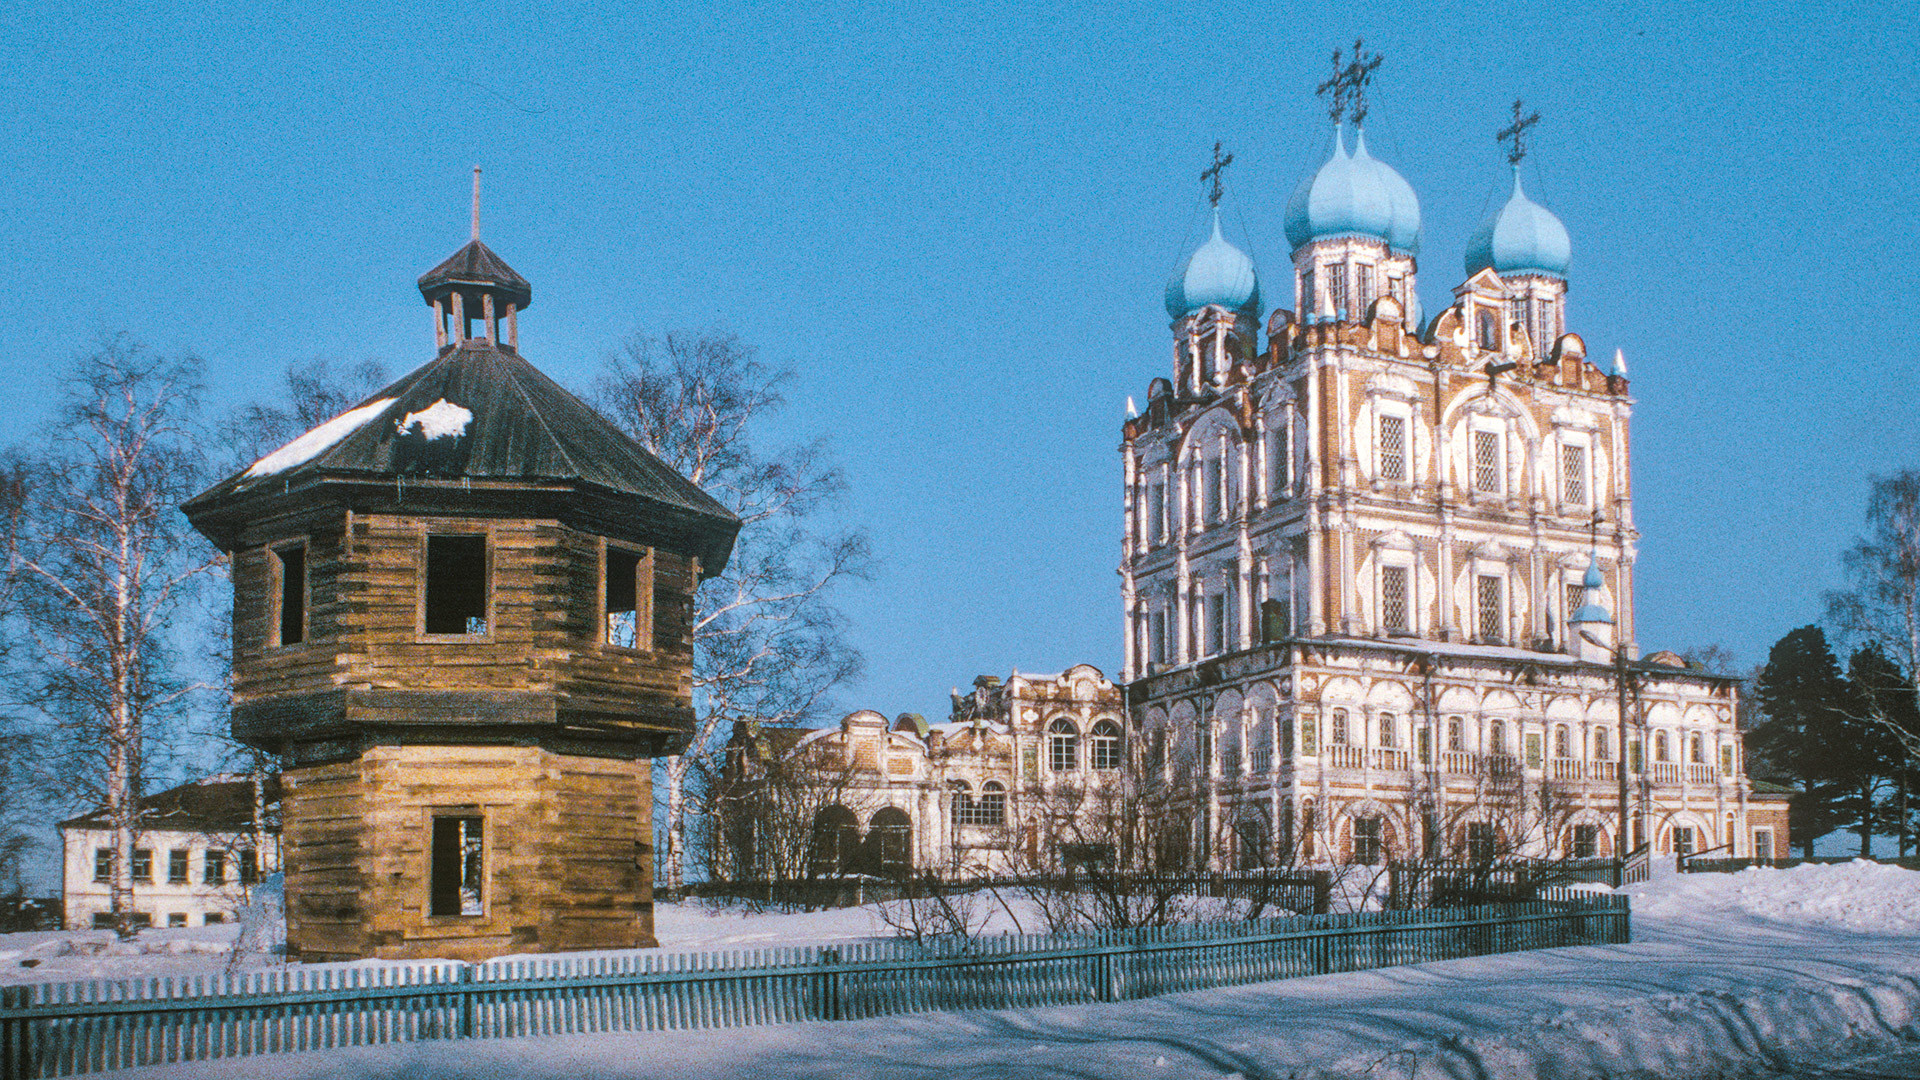 Solvychegodsk. Cathedral of the Presentation, southwest view. Left: recreation of log stockade tower from Stroganov compound. March 8, 1998